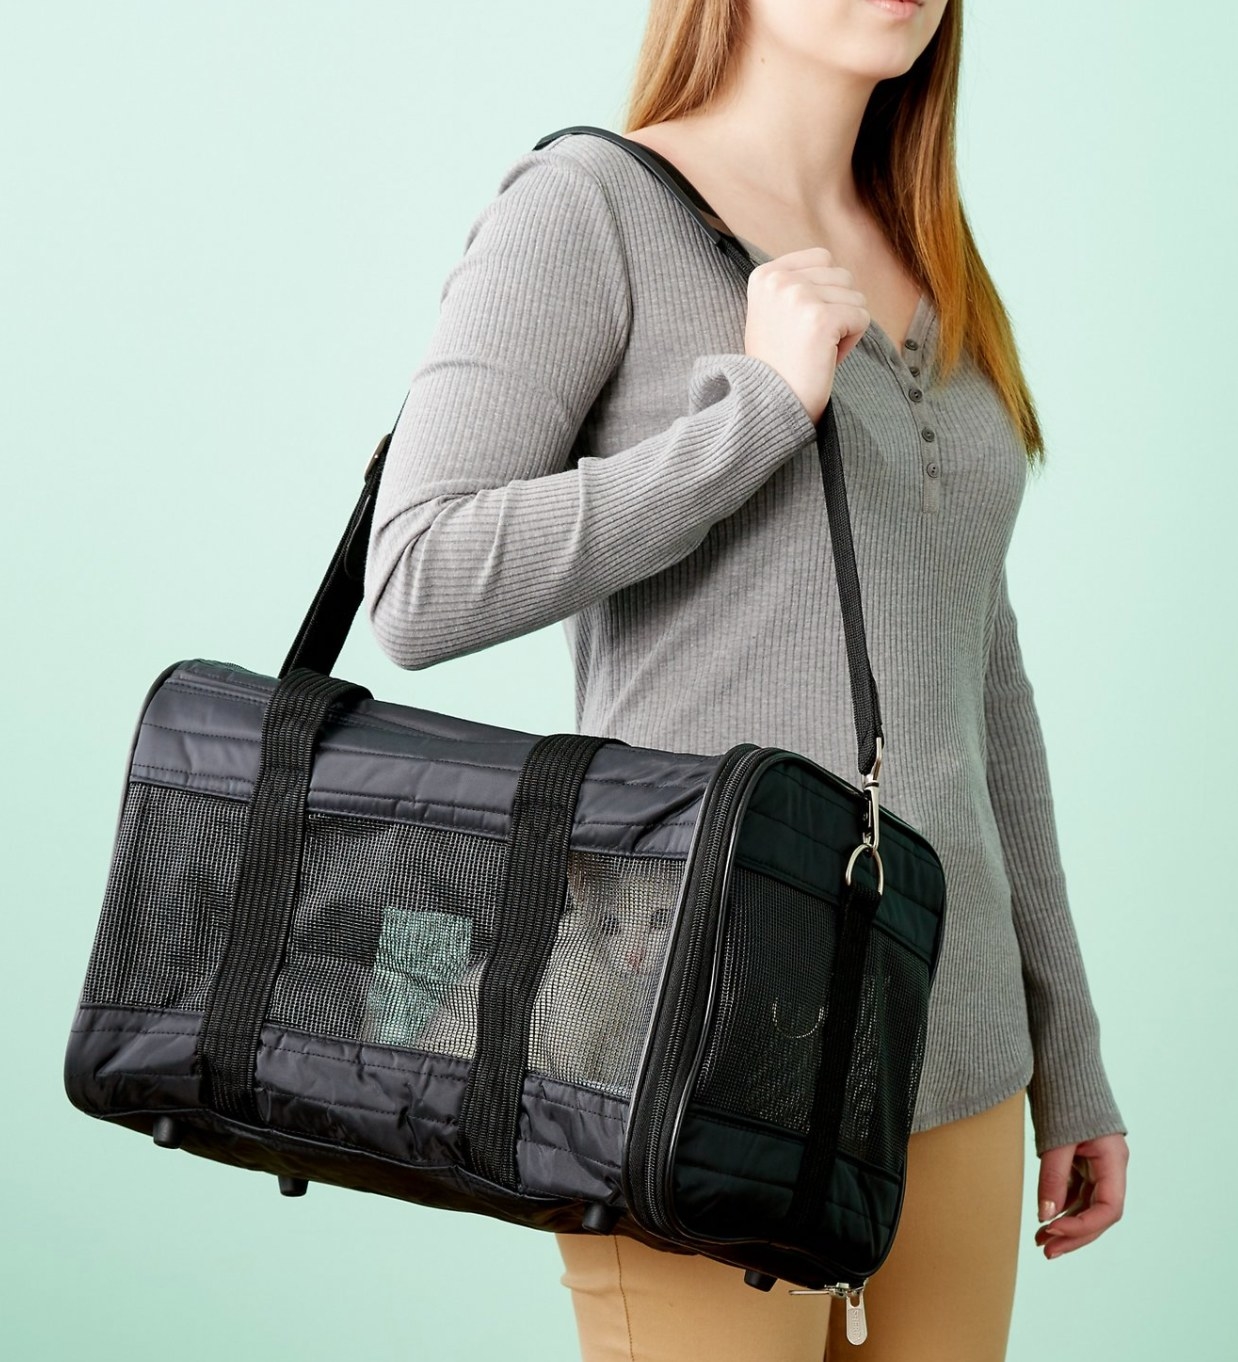 woman holding a travel pet bag with a cat